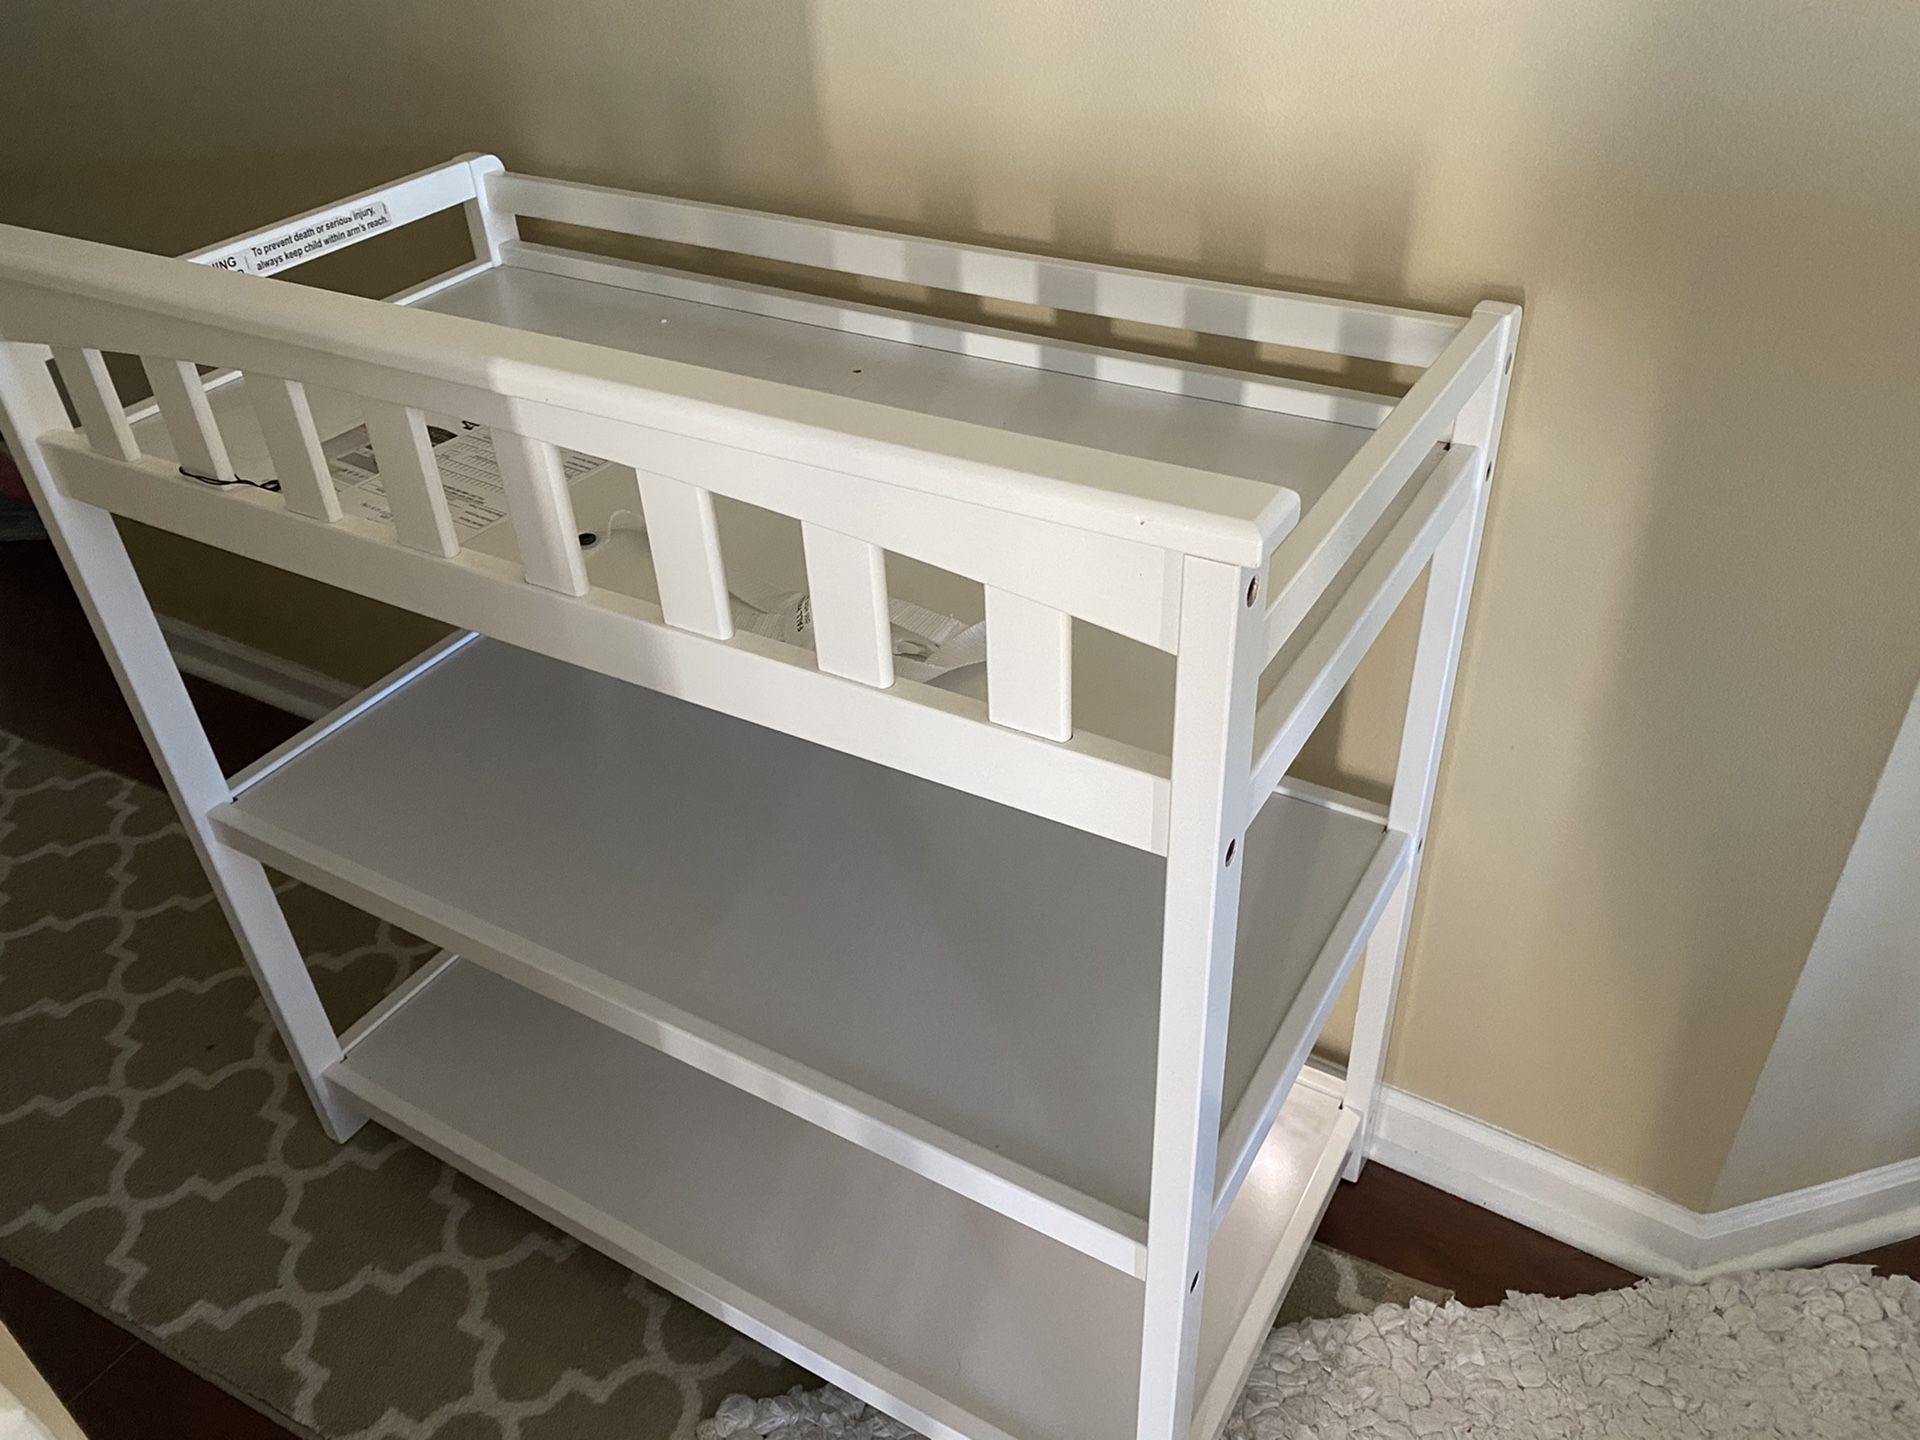 Kid Kraft London white wooden baby changing table- Like new!